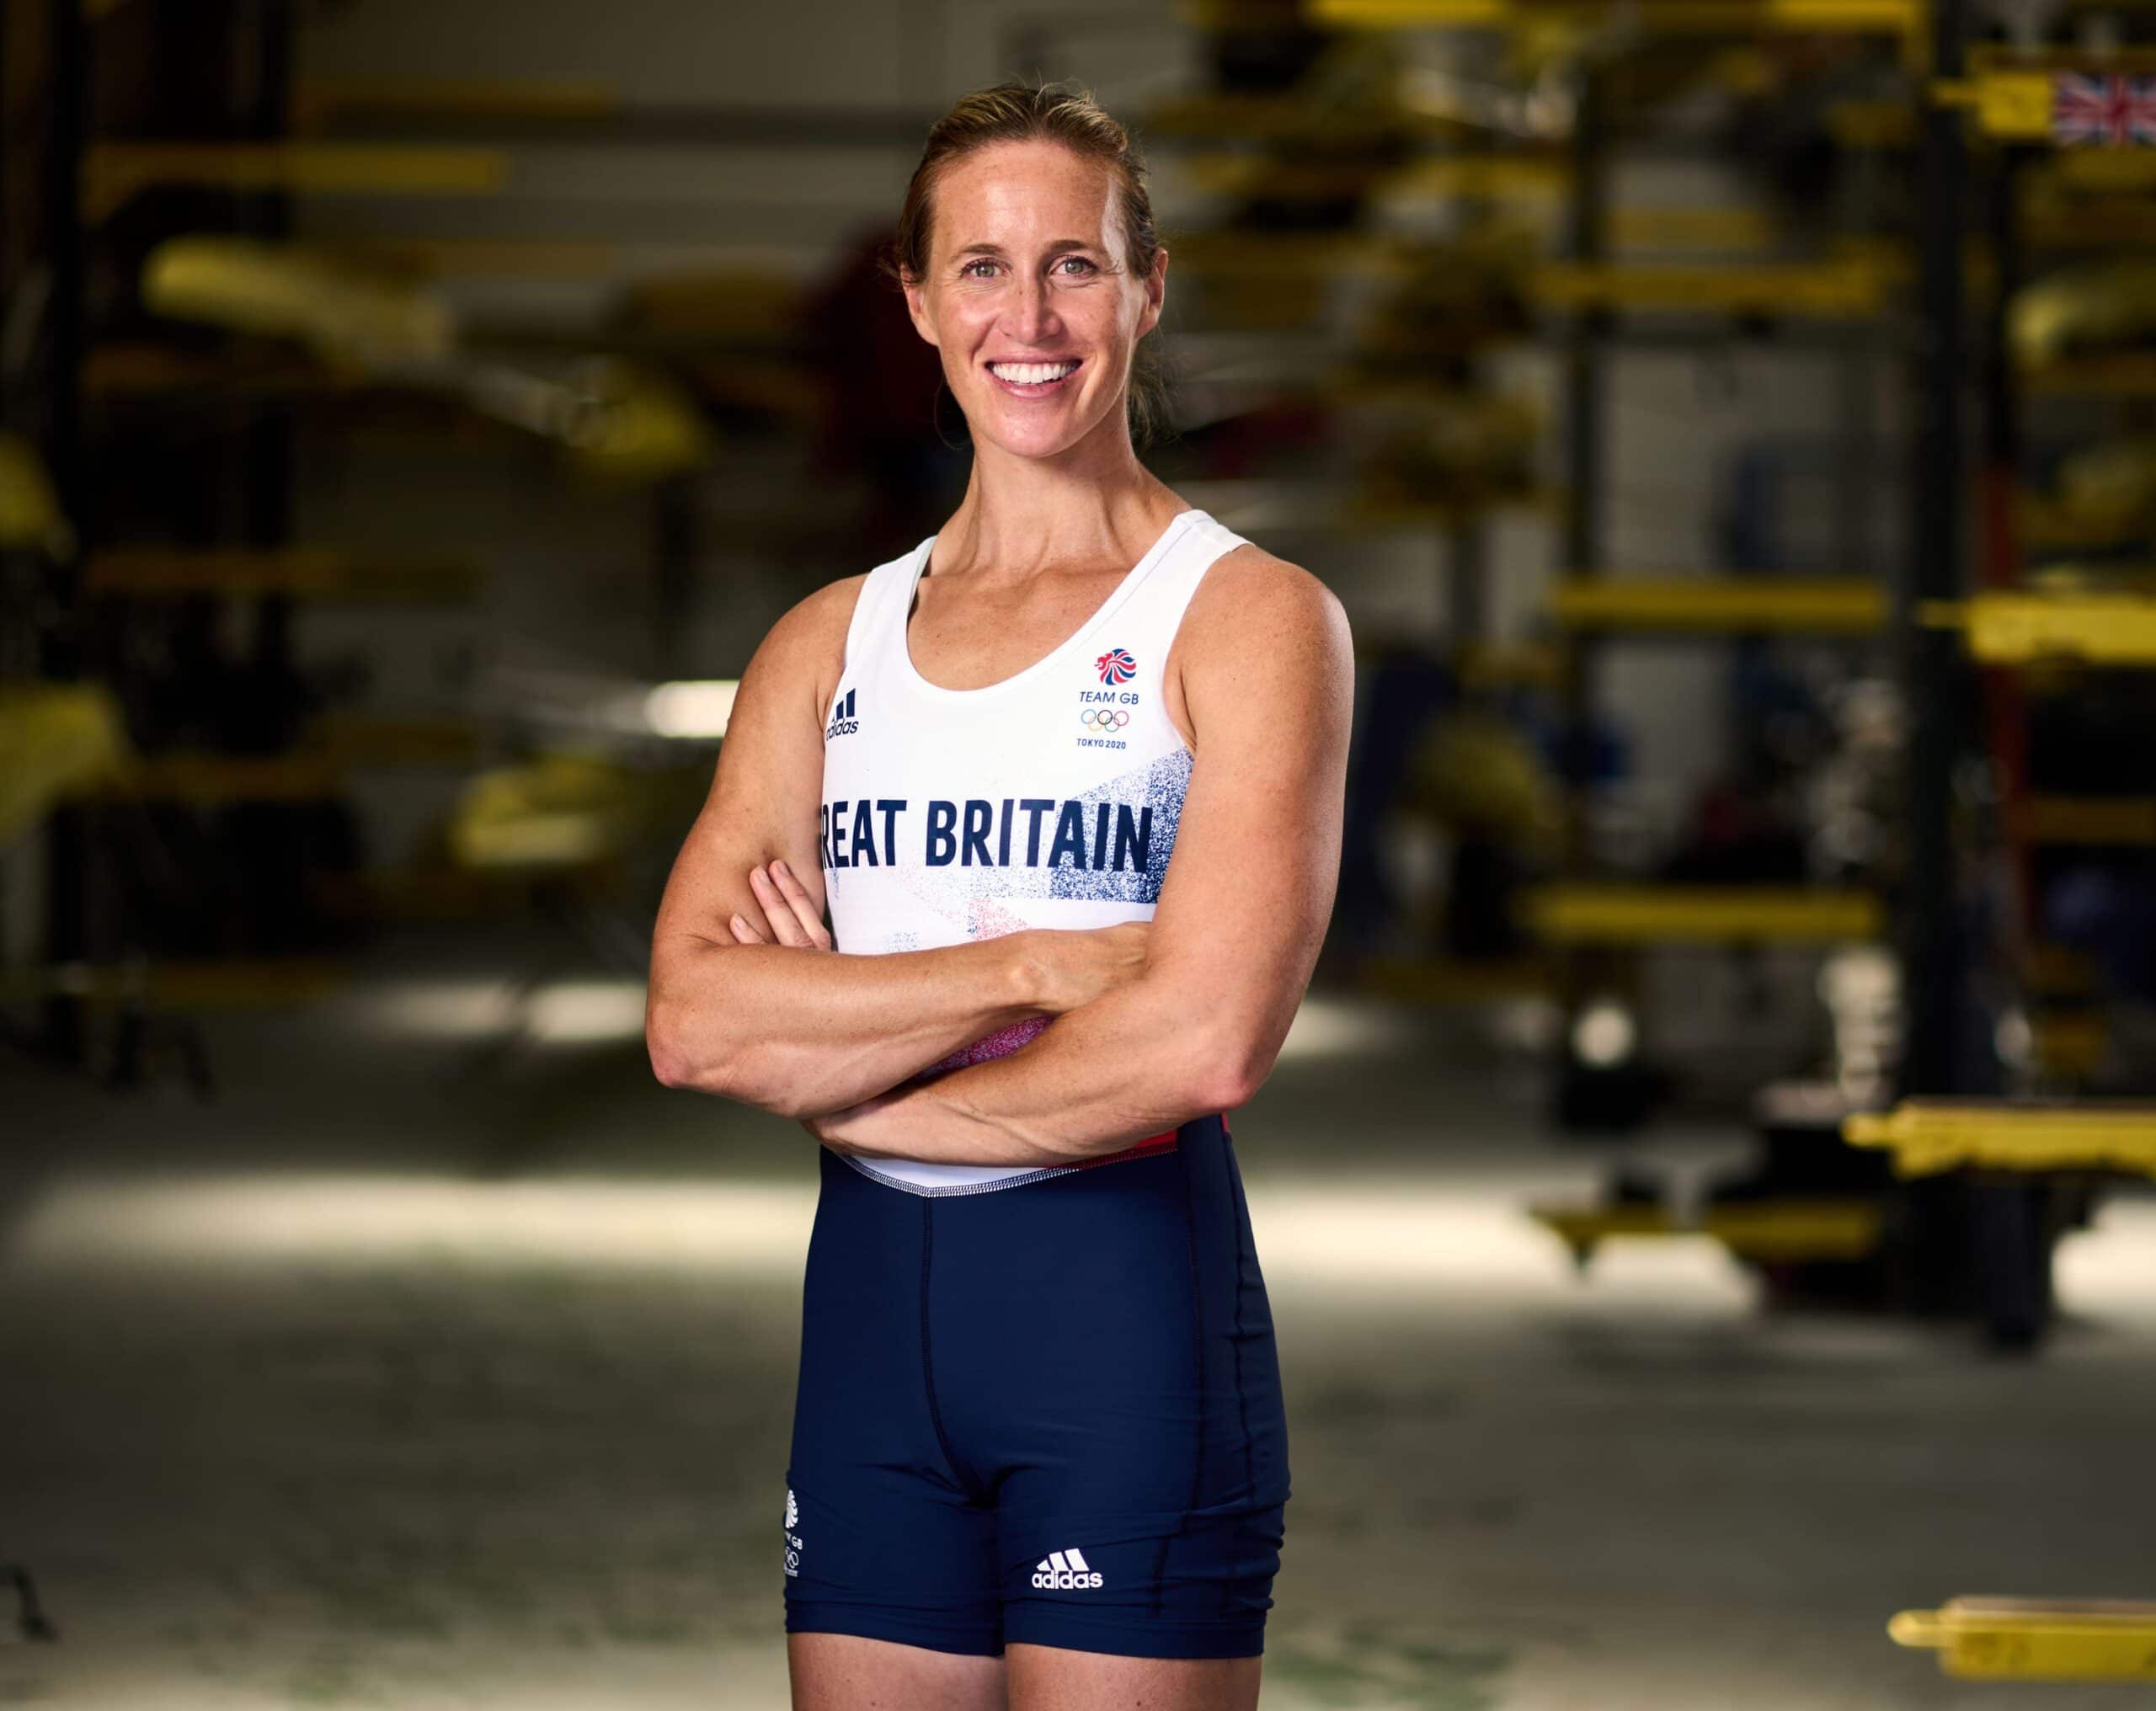 Helen Glover rows for team gb